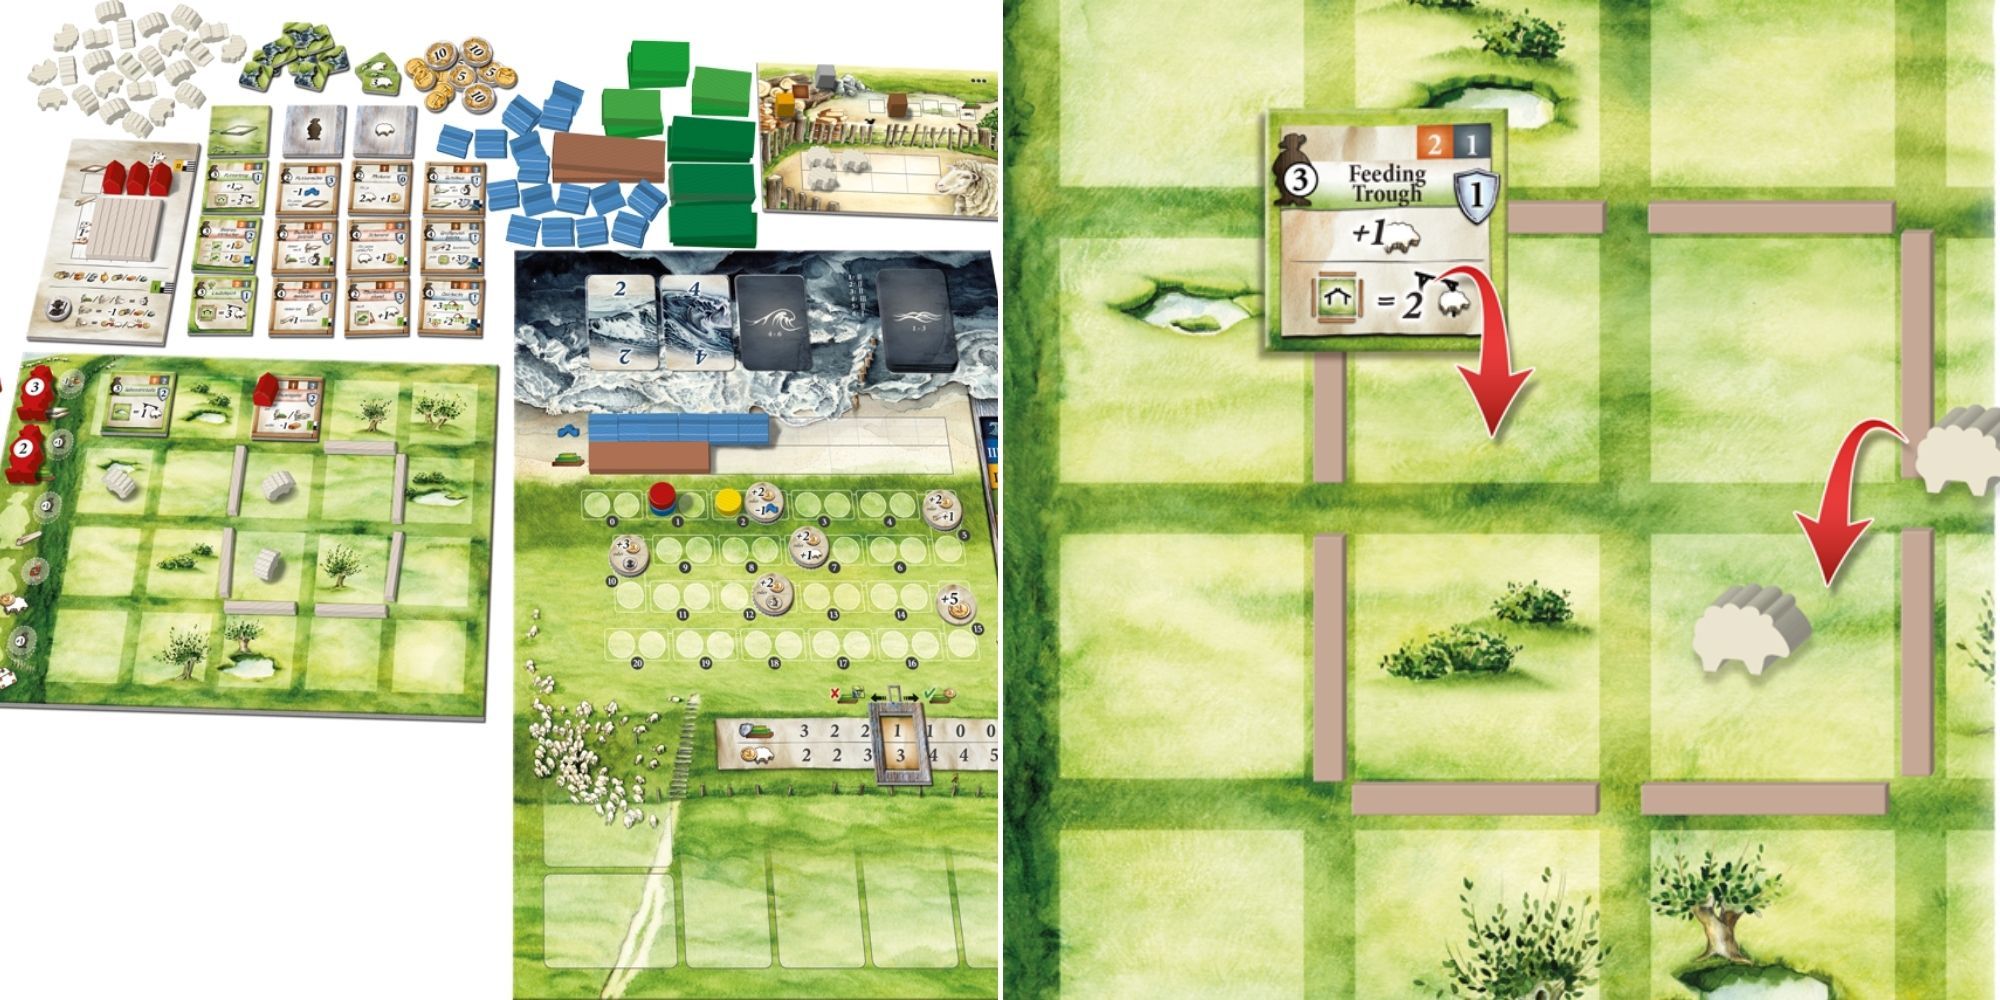 Lowlands - Board game set up and components - Close up of Sheep and buildings being placed on the board